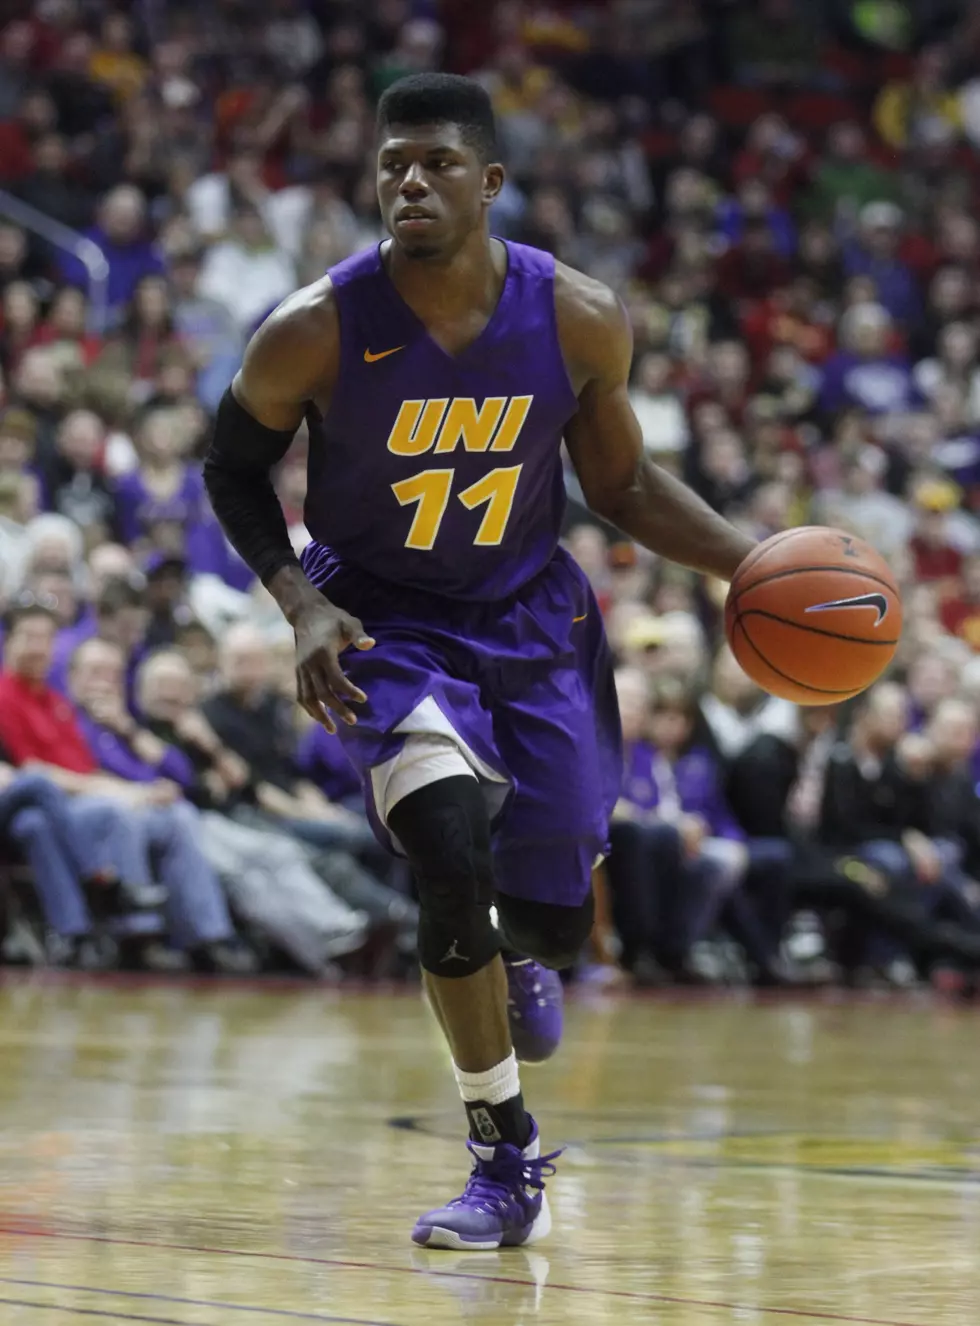 Indiana State Hands UNI Another Road Loss, 74-60